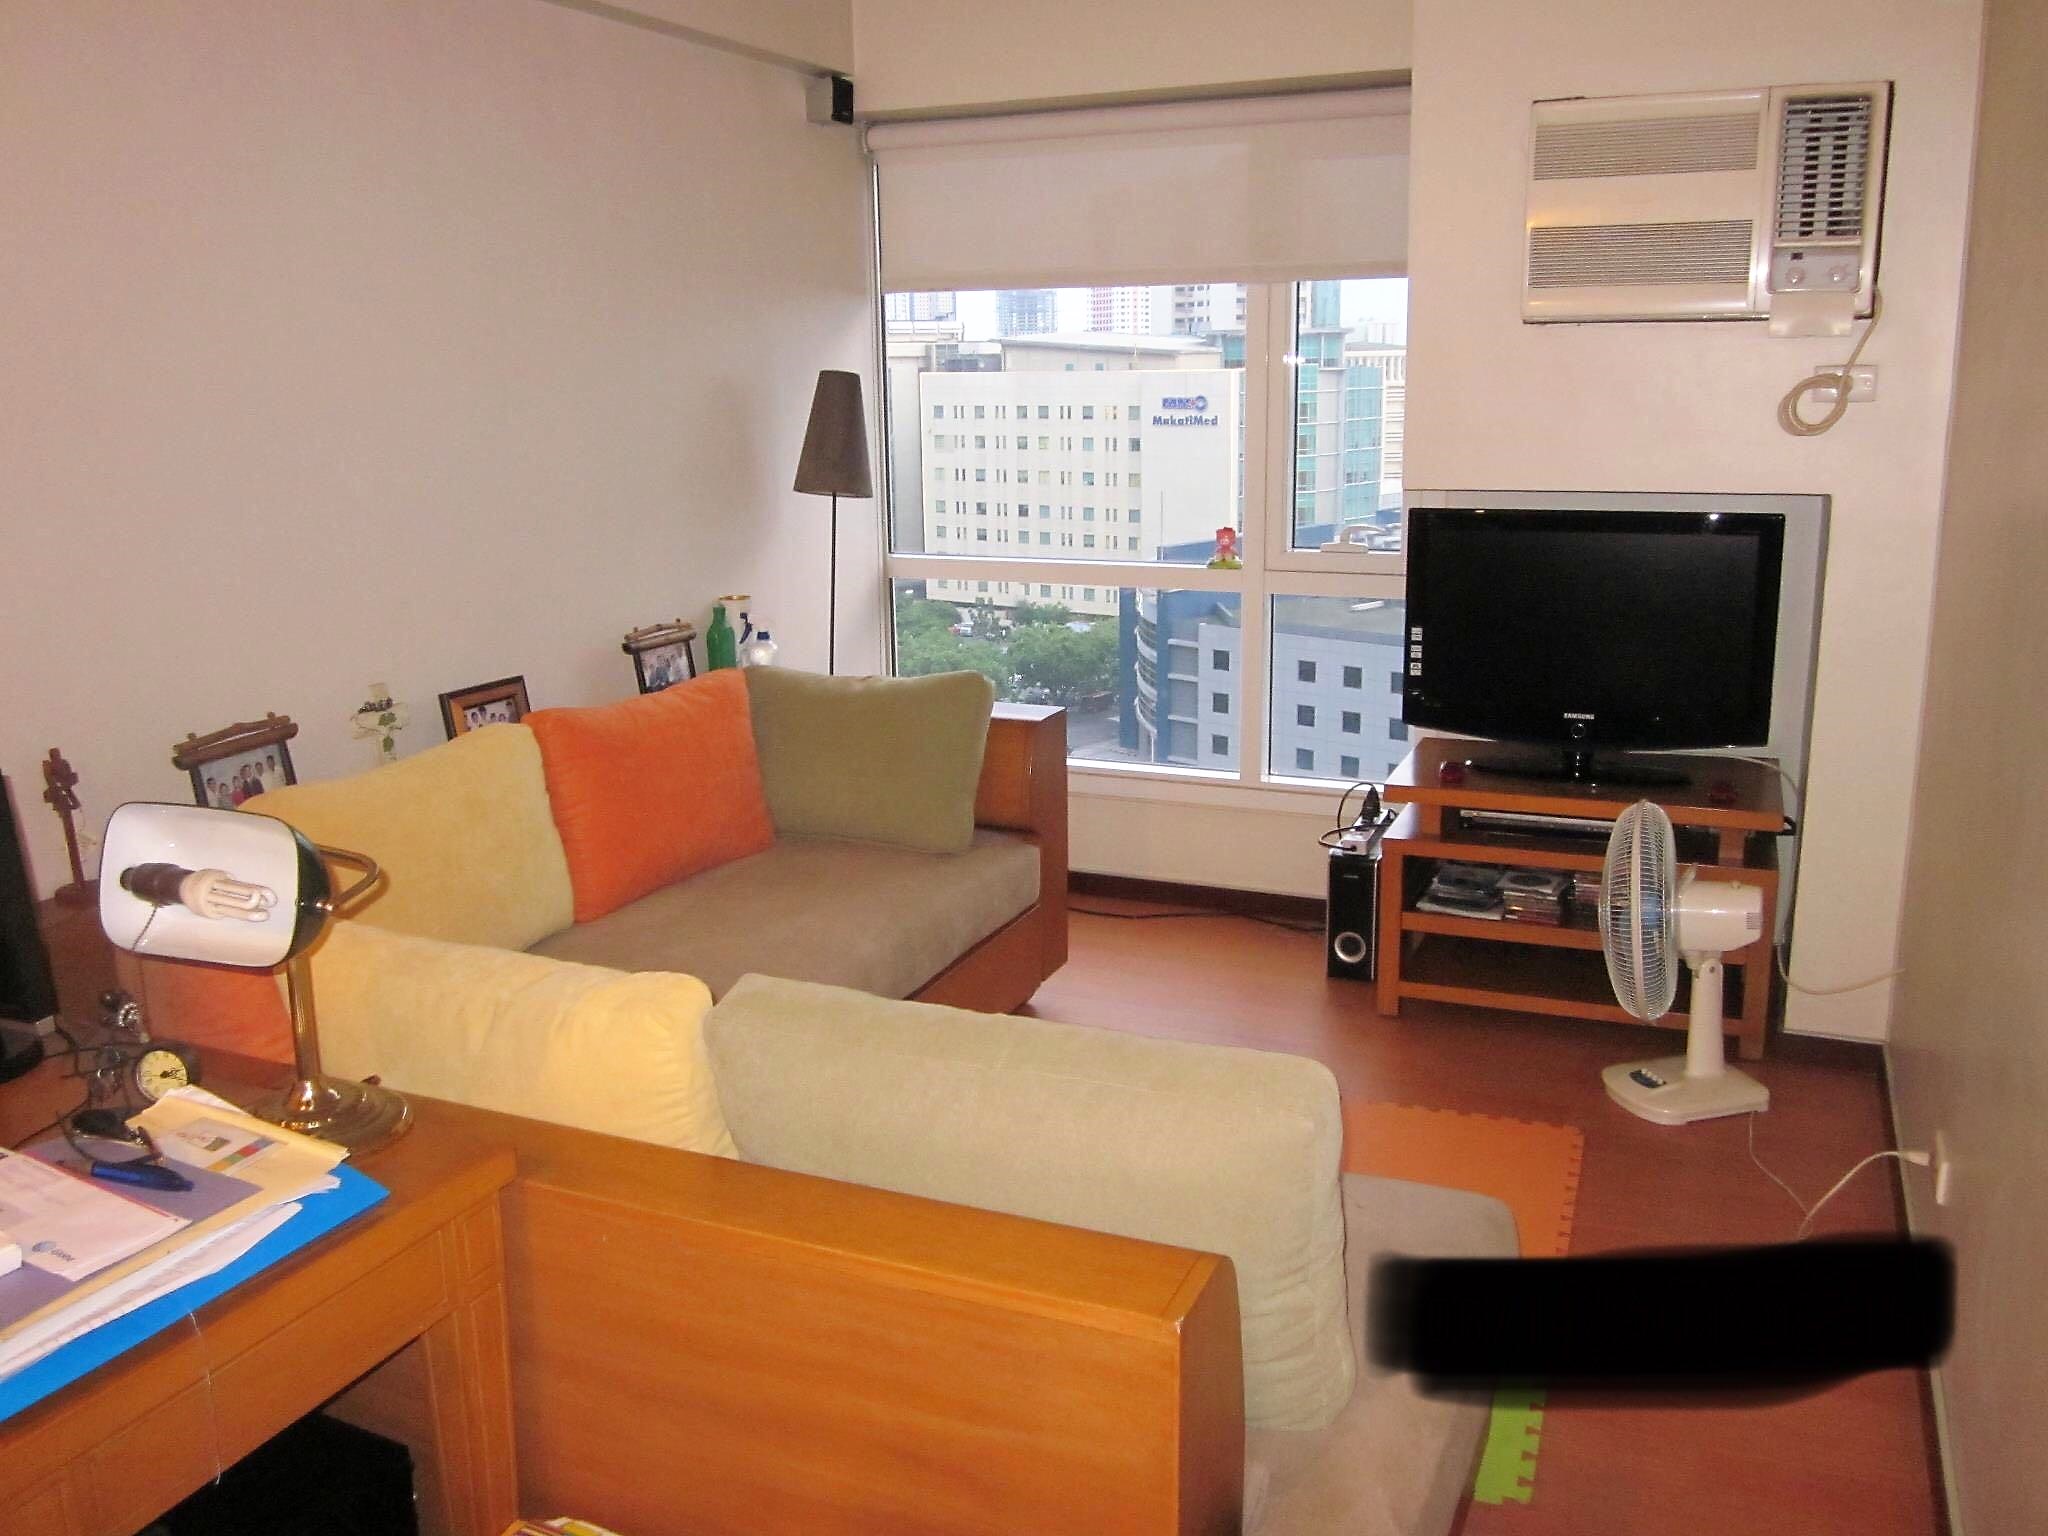 Condo Unit For Rent – 11th Floor Tower 1 at The Columns Ayala